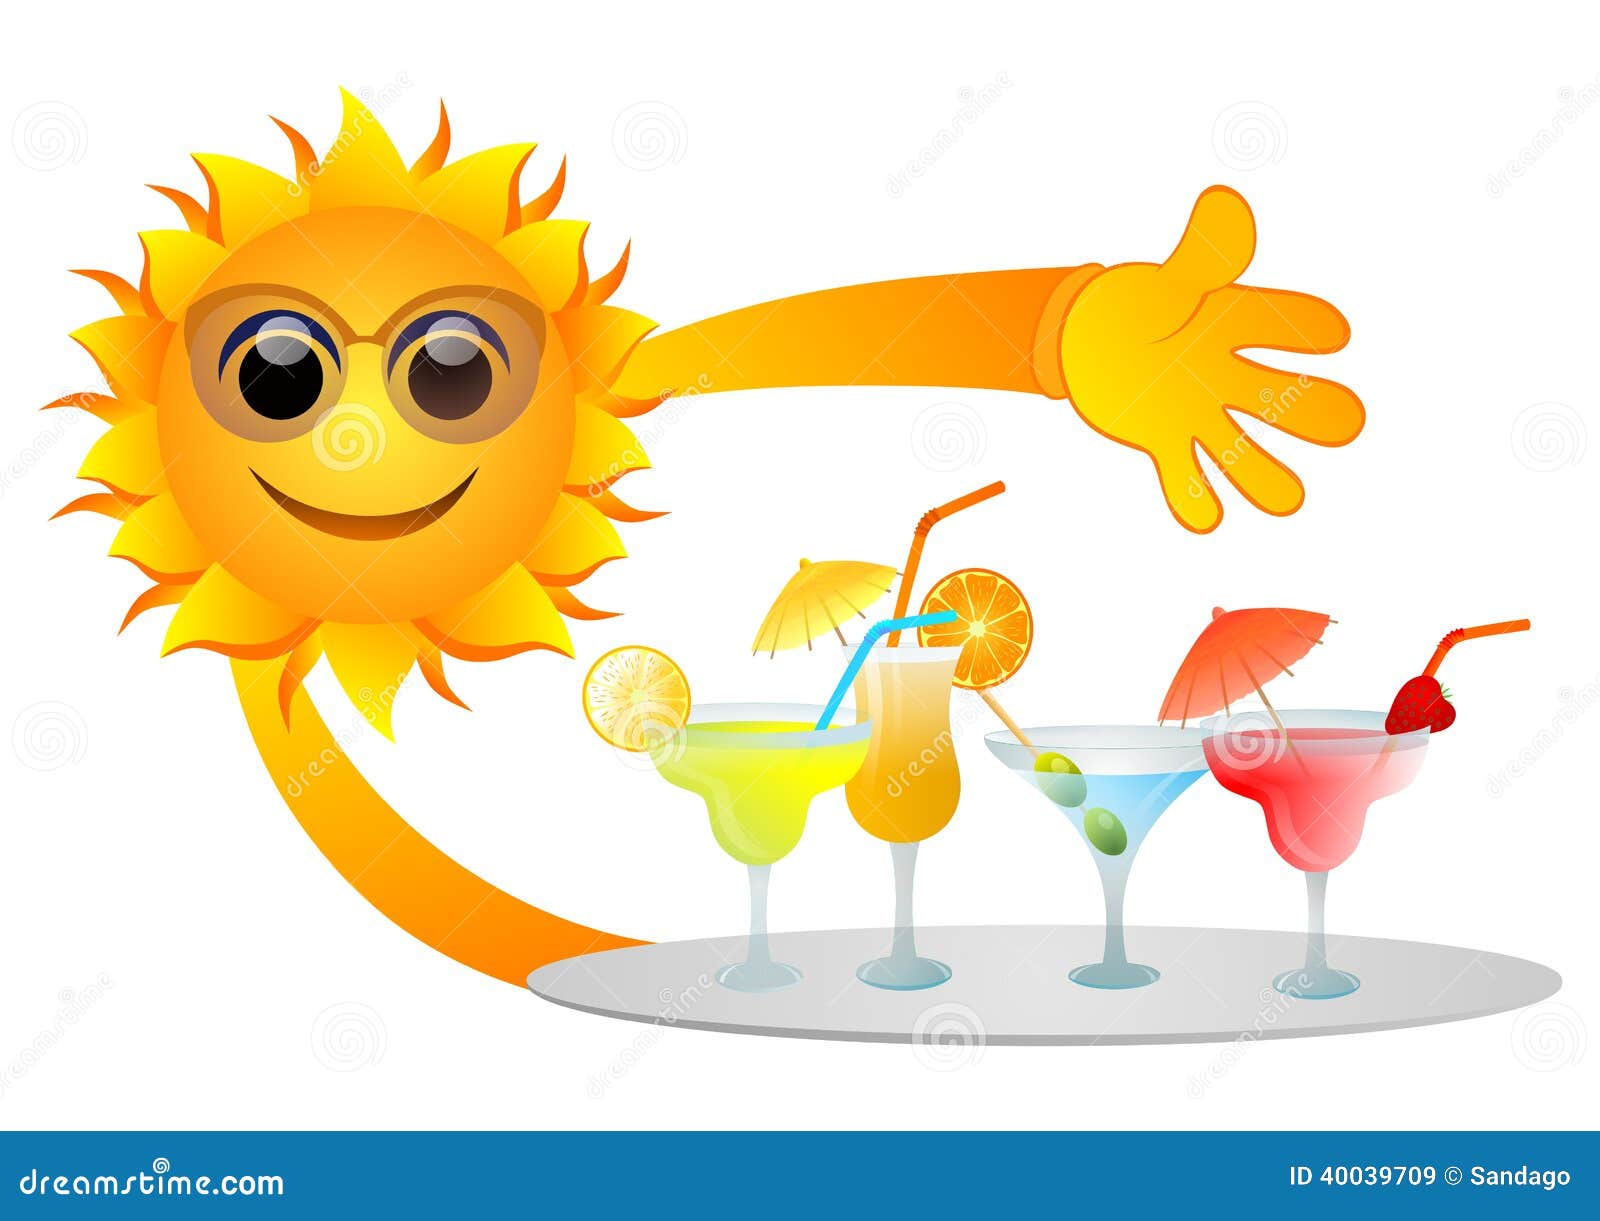 Image result for sun and drinks